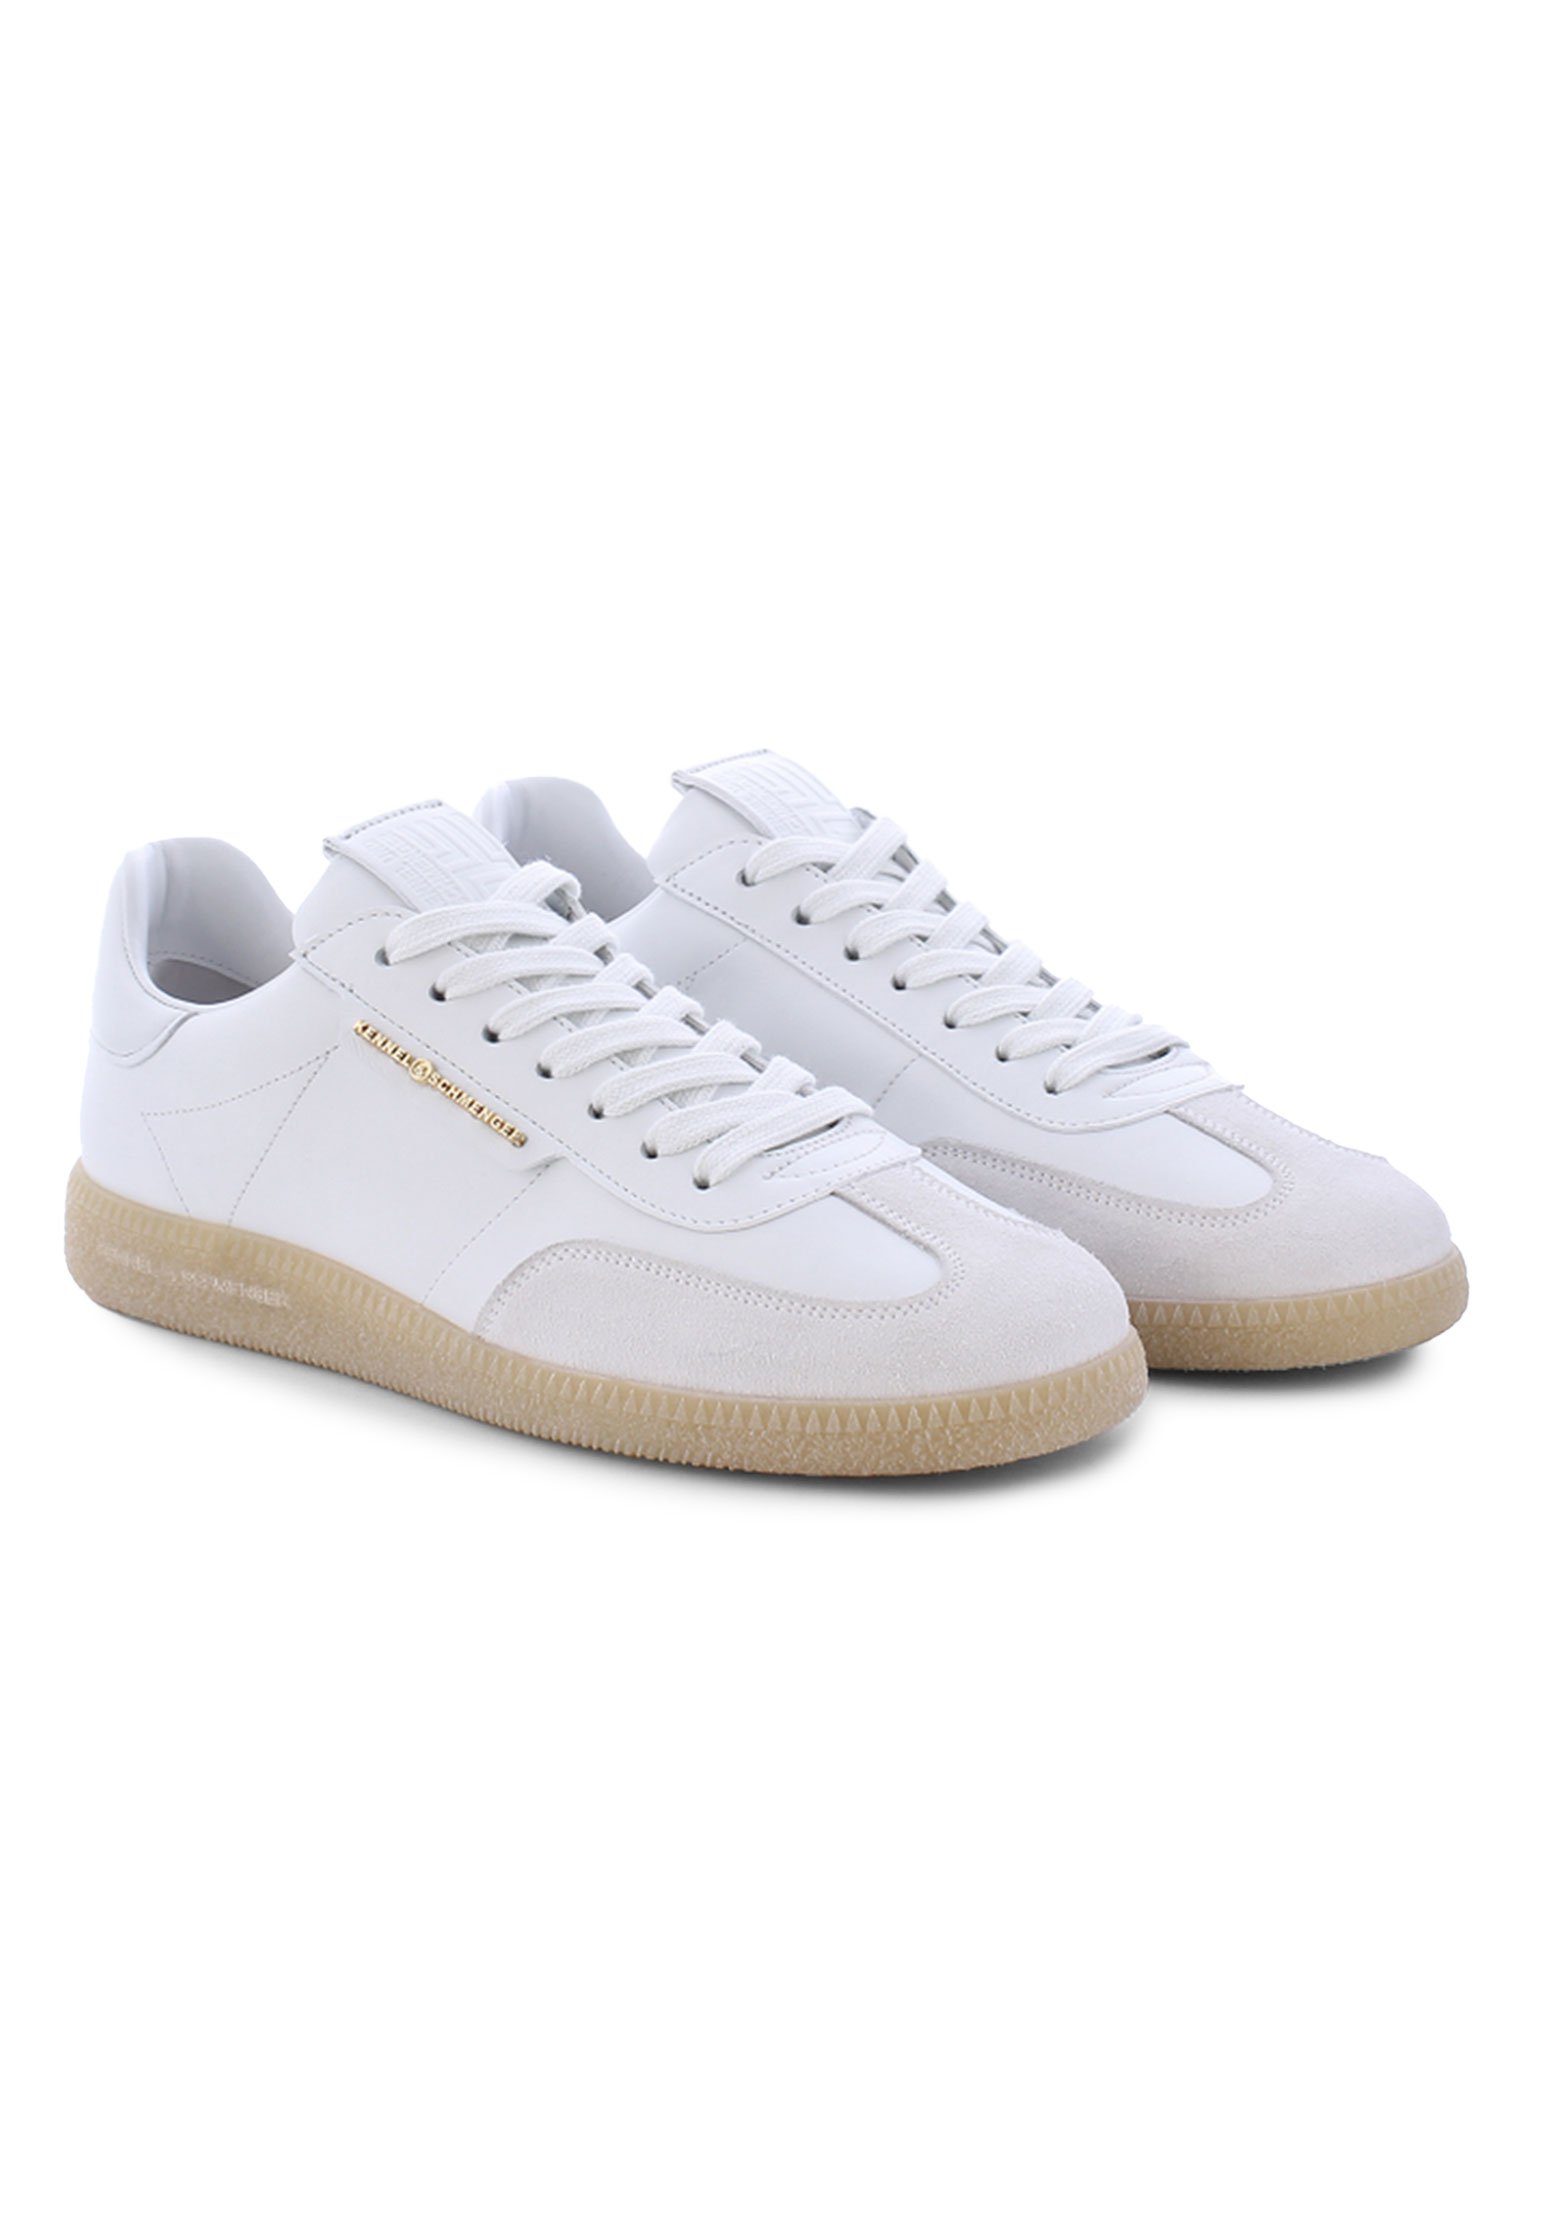 Sneakers KENNEL&SCHMENGER Color: white (Code: 4161) in online store Allure